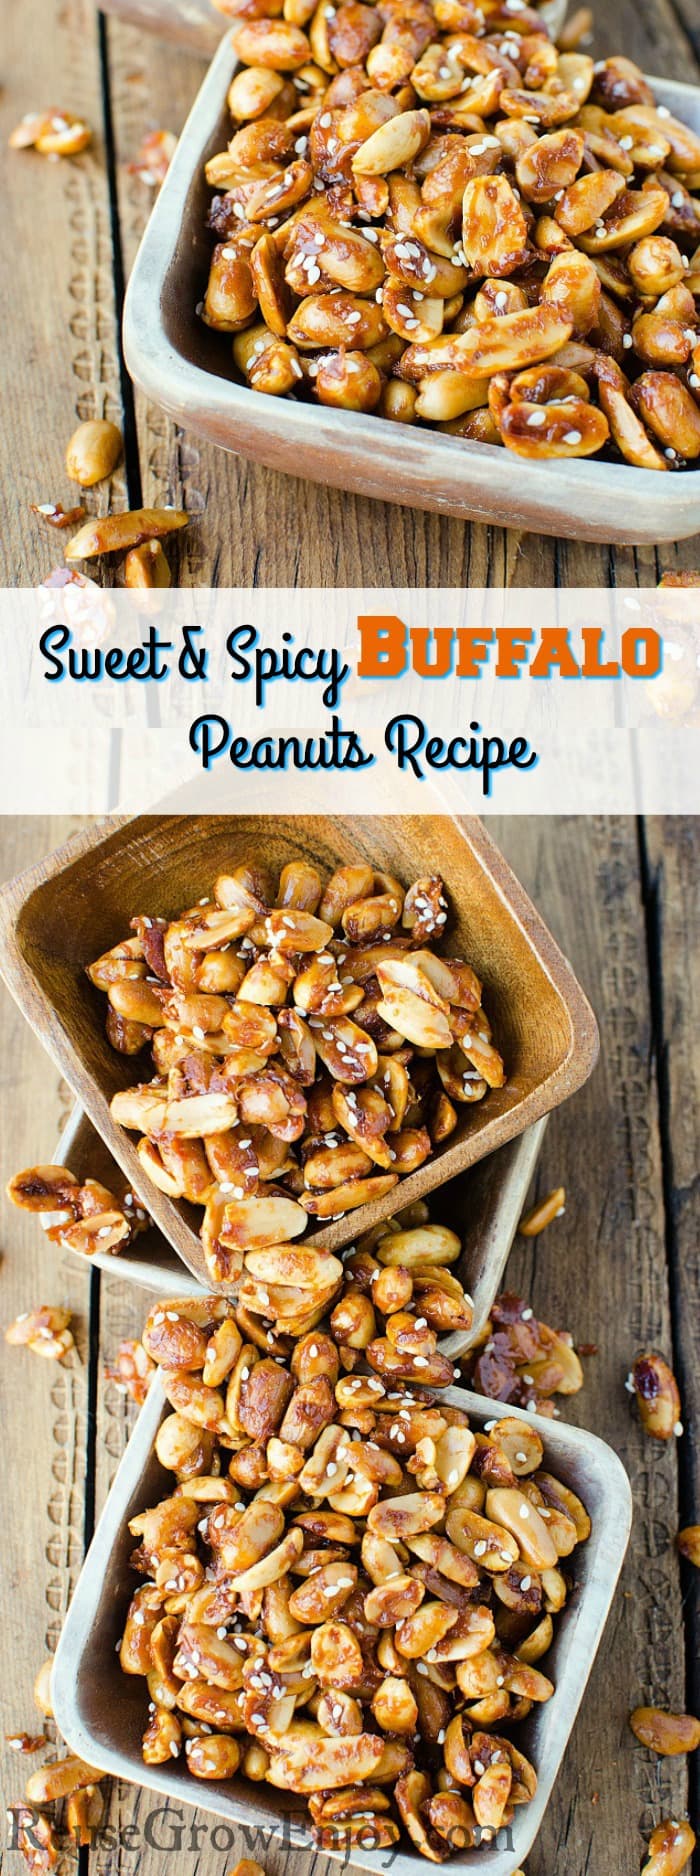 If you are in the need for new snack idea, this is sure to be a hit! This recipe for Sweet And Spicy Buffalo Peanuts has just the right touch of sweet and spicy that everyone loves. Great recipe for game day or any type of party.